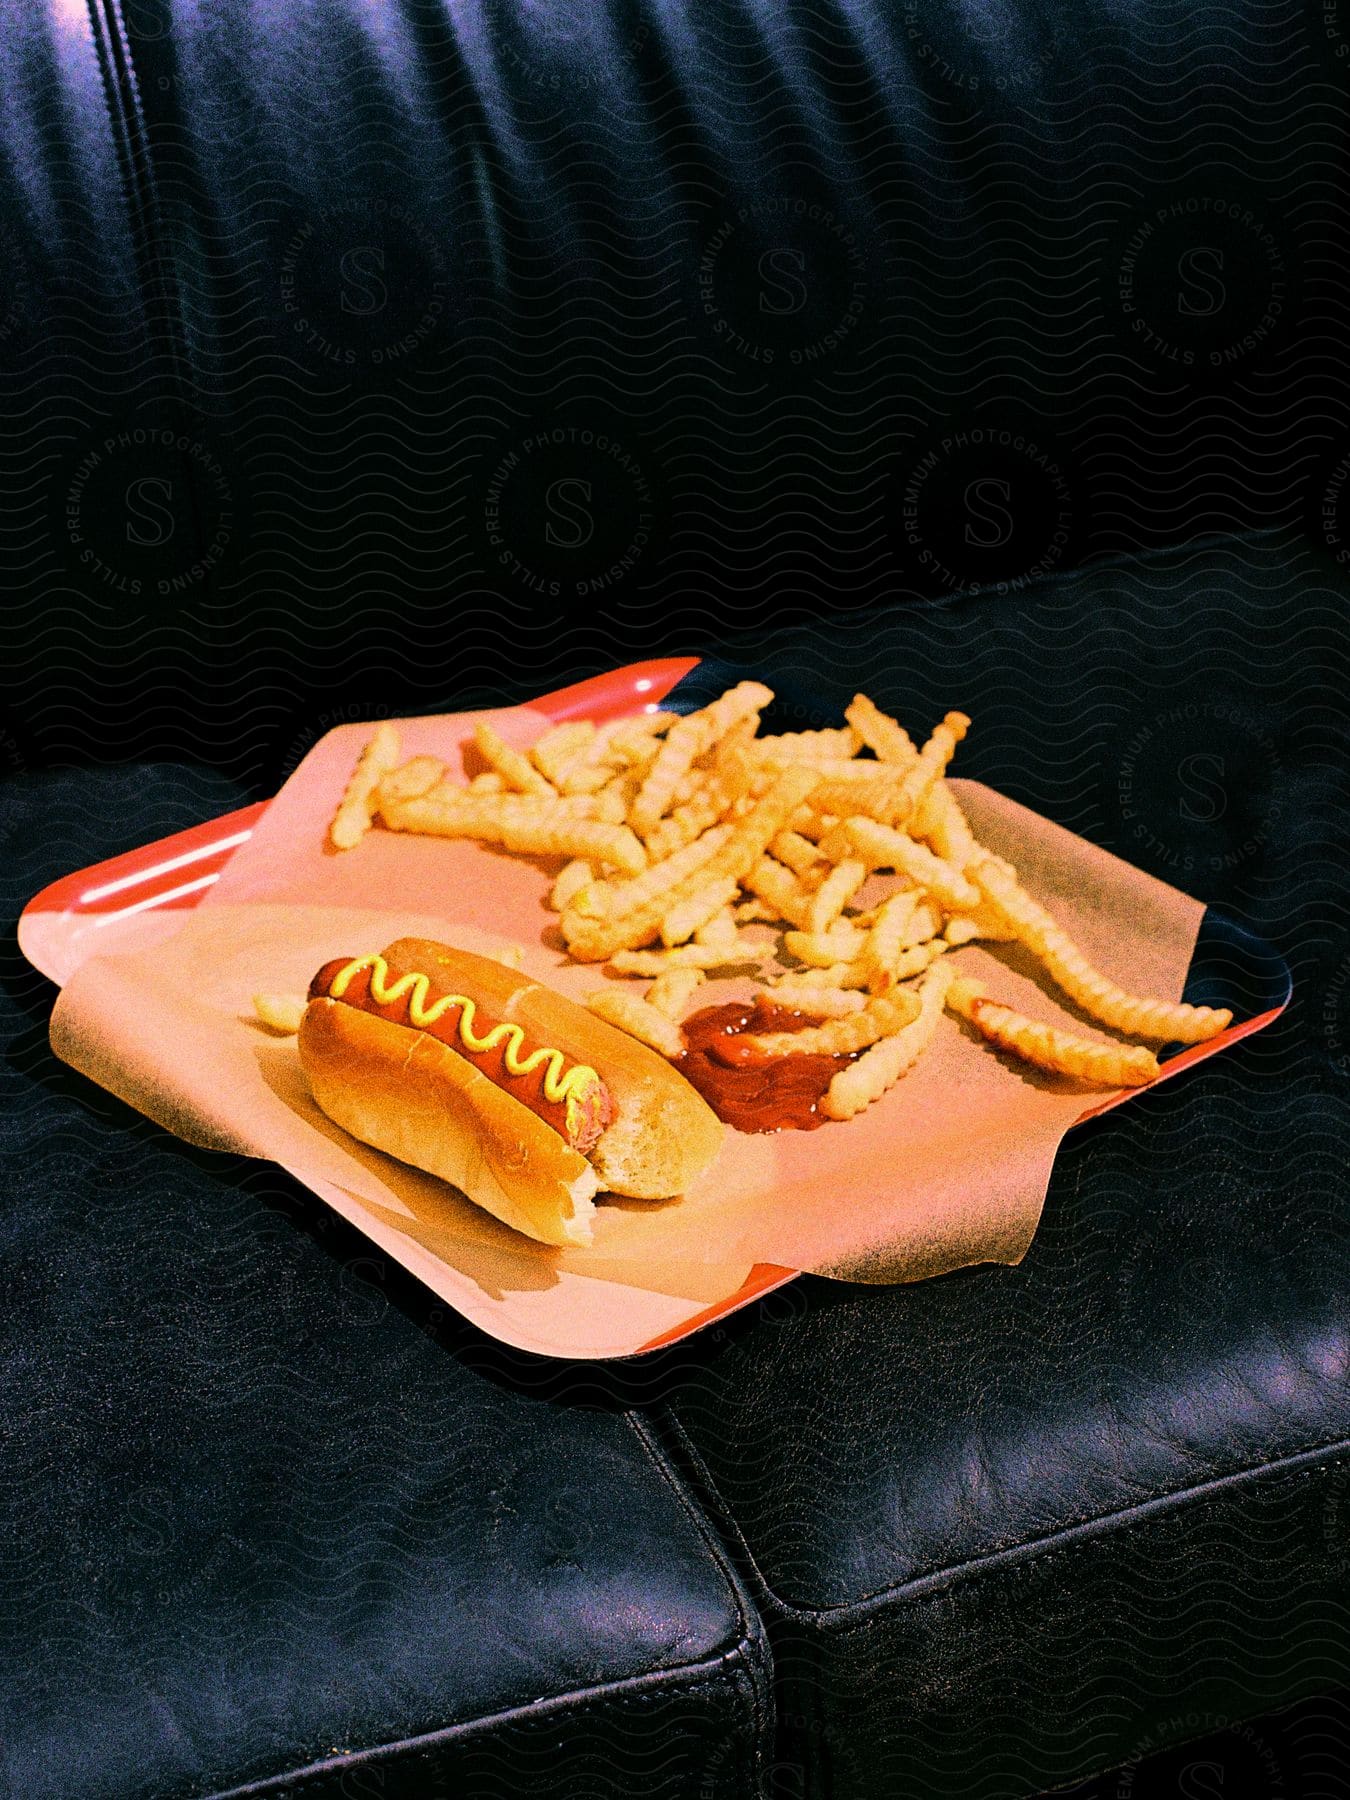 A hot dog with French fries are plated on a square tray.